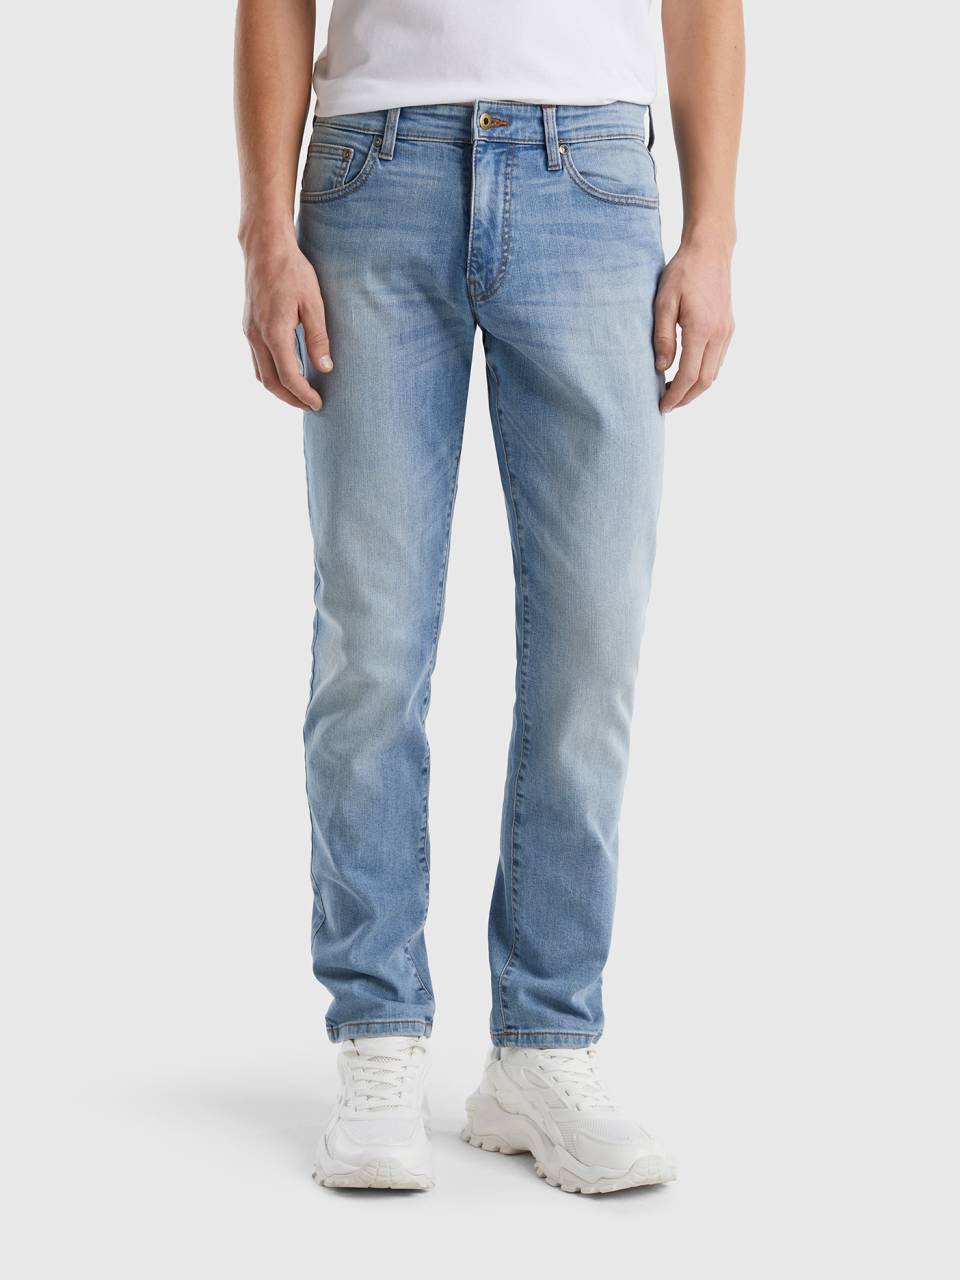 Benetton slim fit jeans with tears. 1